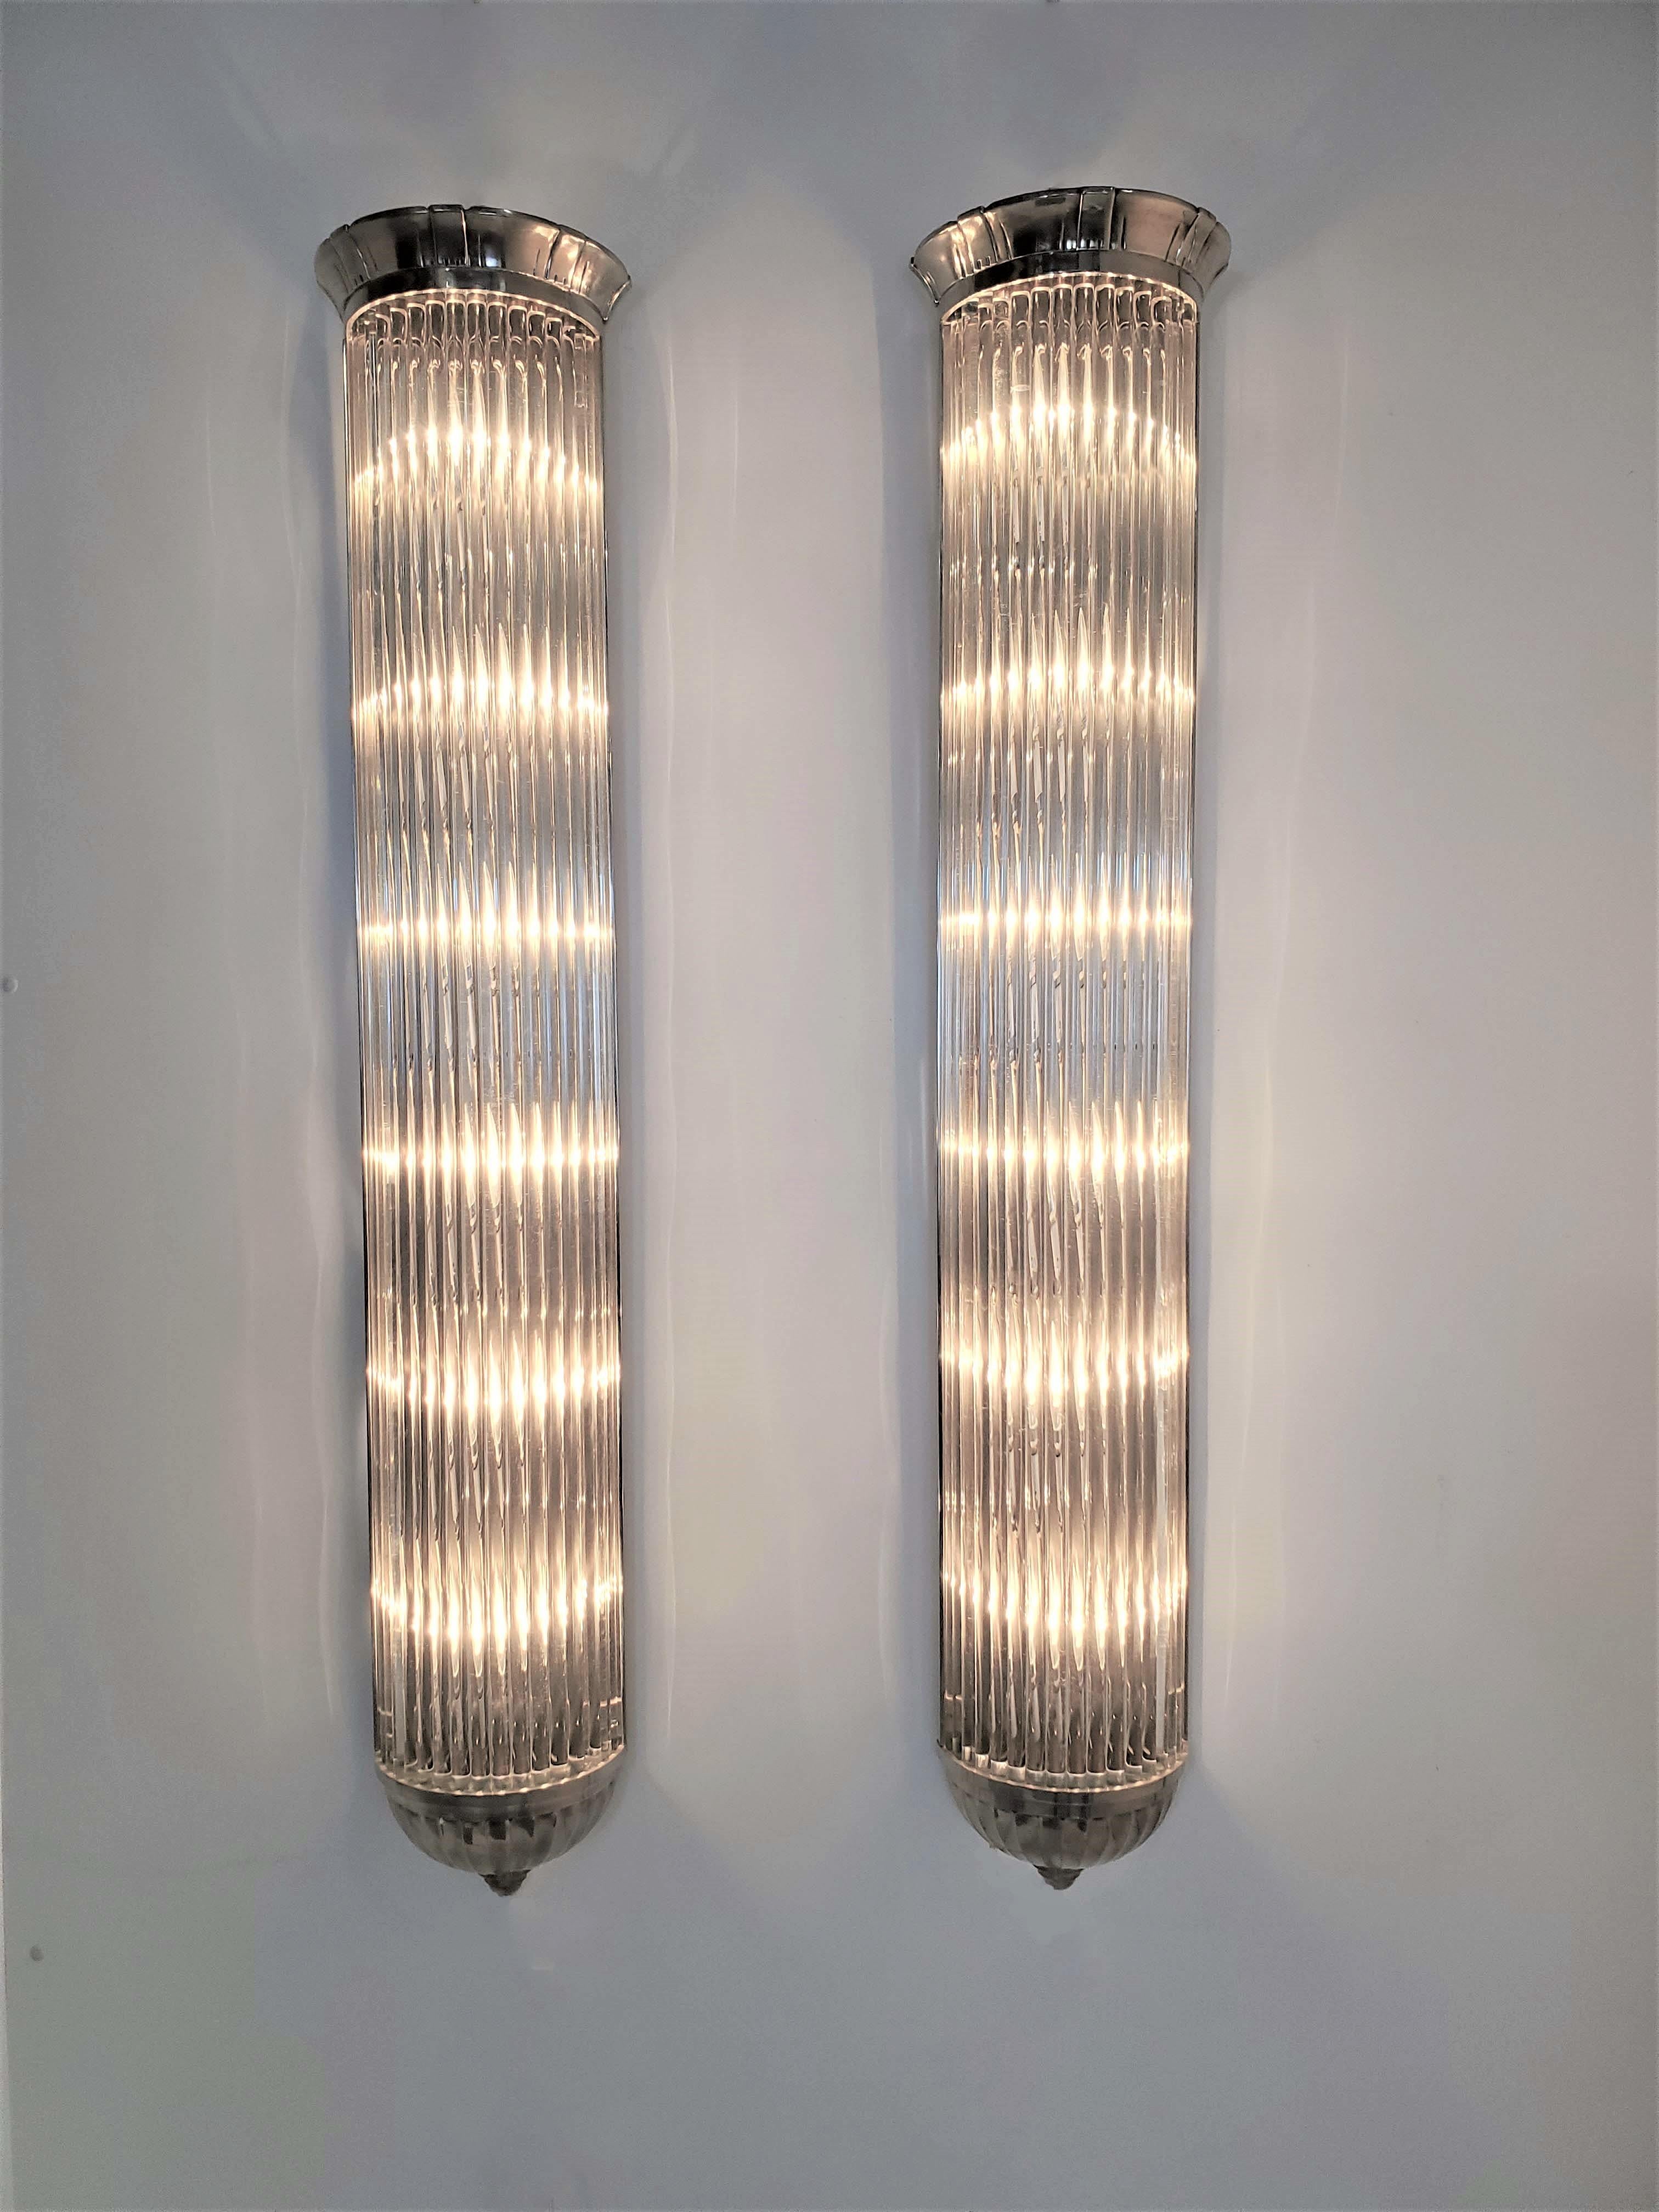 Monumental Pair of French Modernist Long Tubular Sconces by Petitot For Sale 11